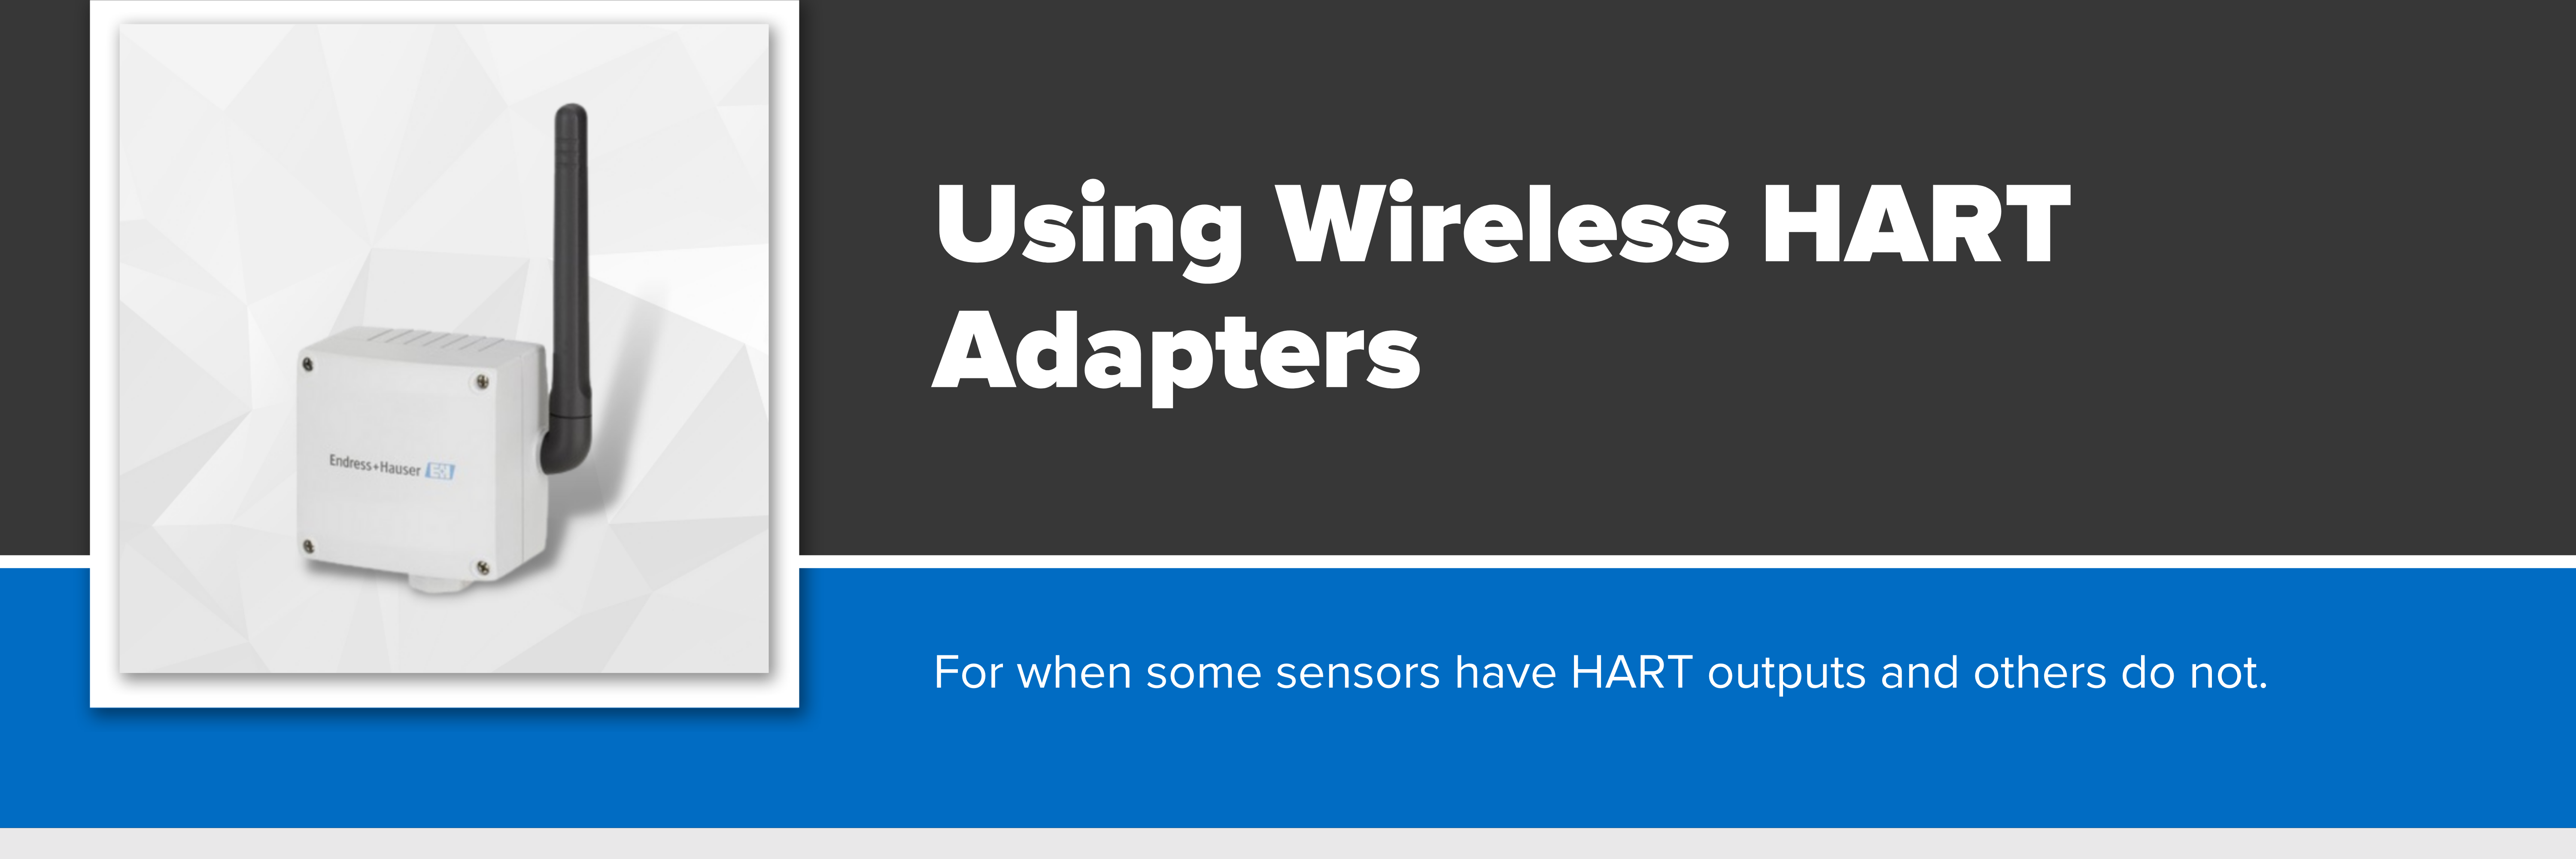 Header image with text "Using Wireless HART Adapters"